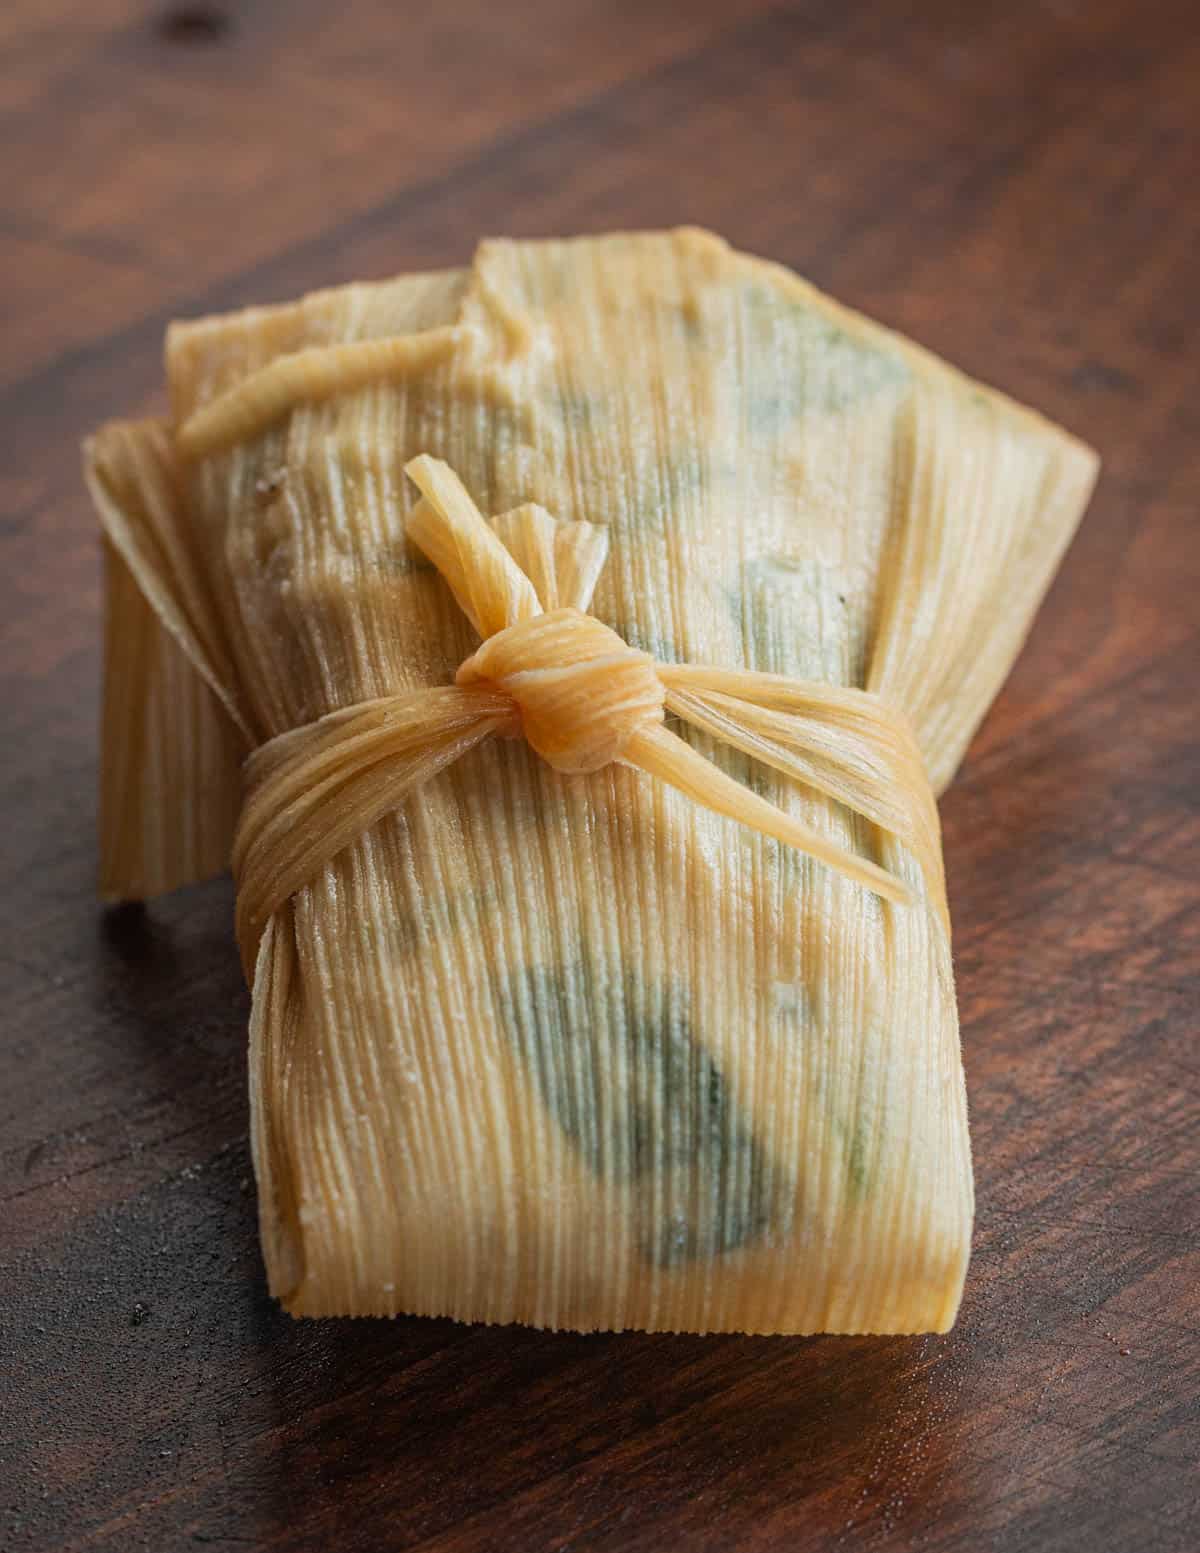 A chipilin tamal wrapped in a corn husk. 